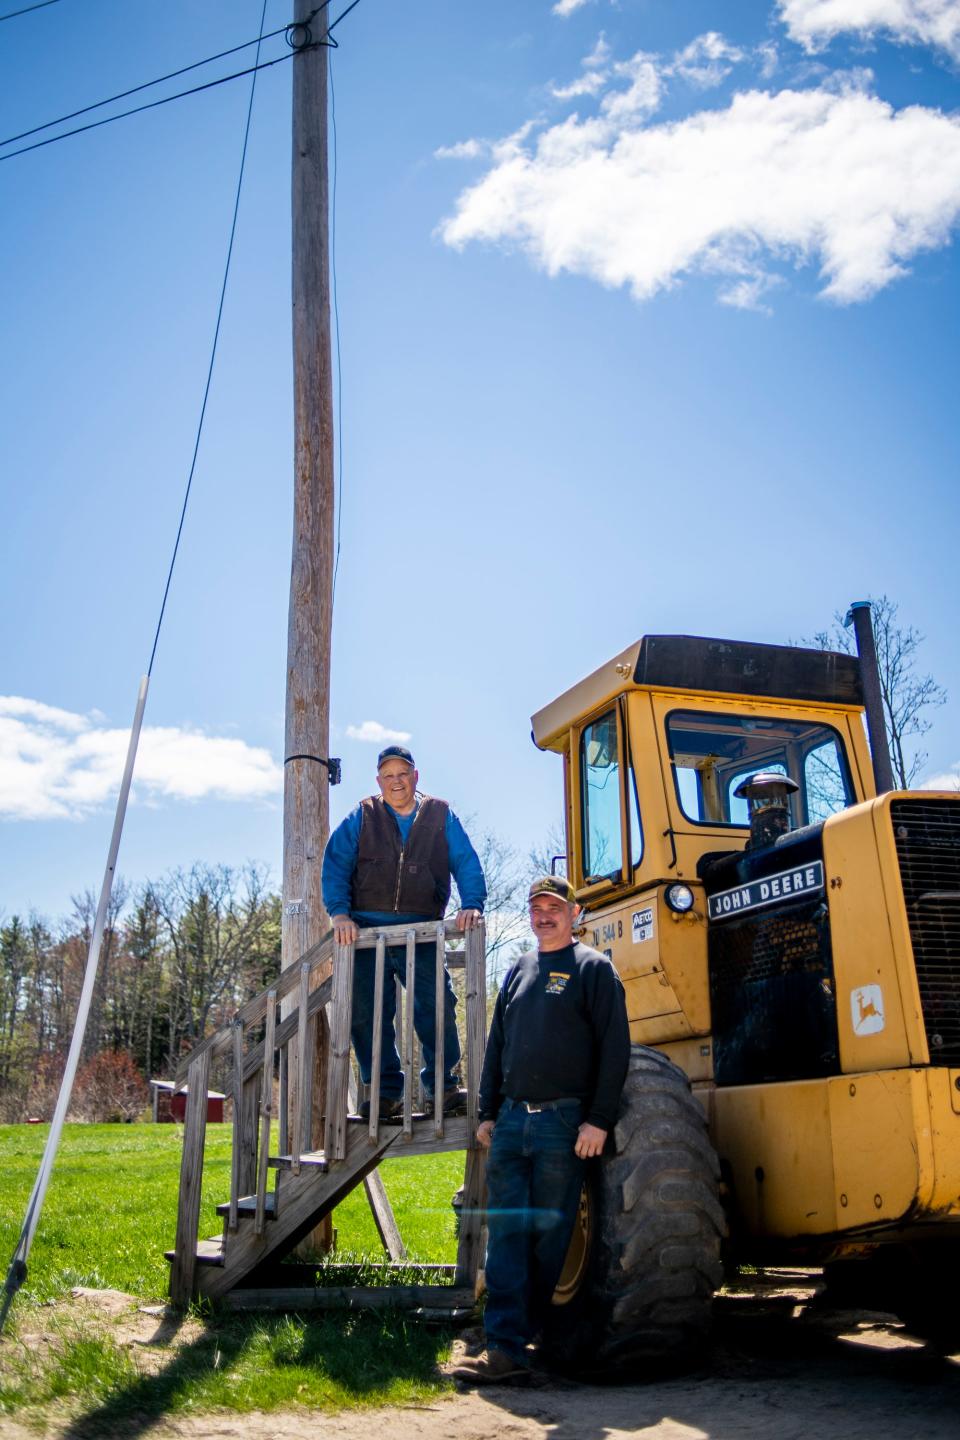 Buddy, left, and son Brent Woodsome stand April 26, 2021, next to the utility pole where a giant headless statue once was in North Waterboro, Maine. "I wish I could have fixed it, but I didn't know how," Buddy said in reference to the statue.